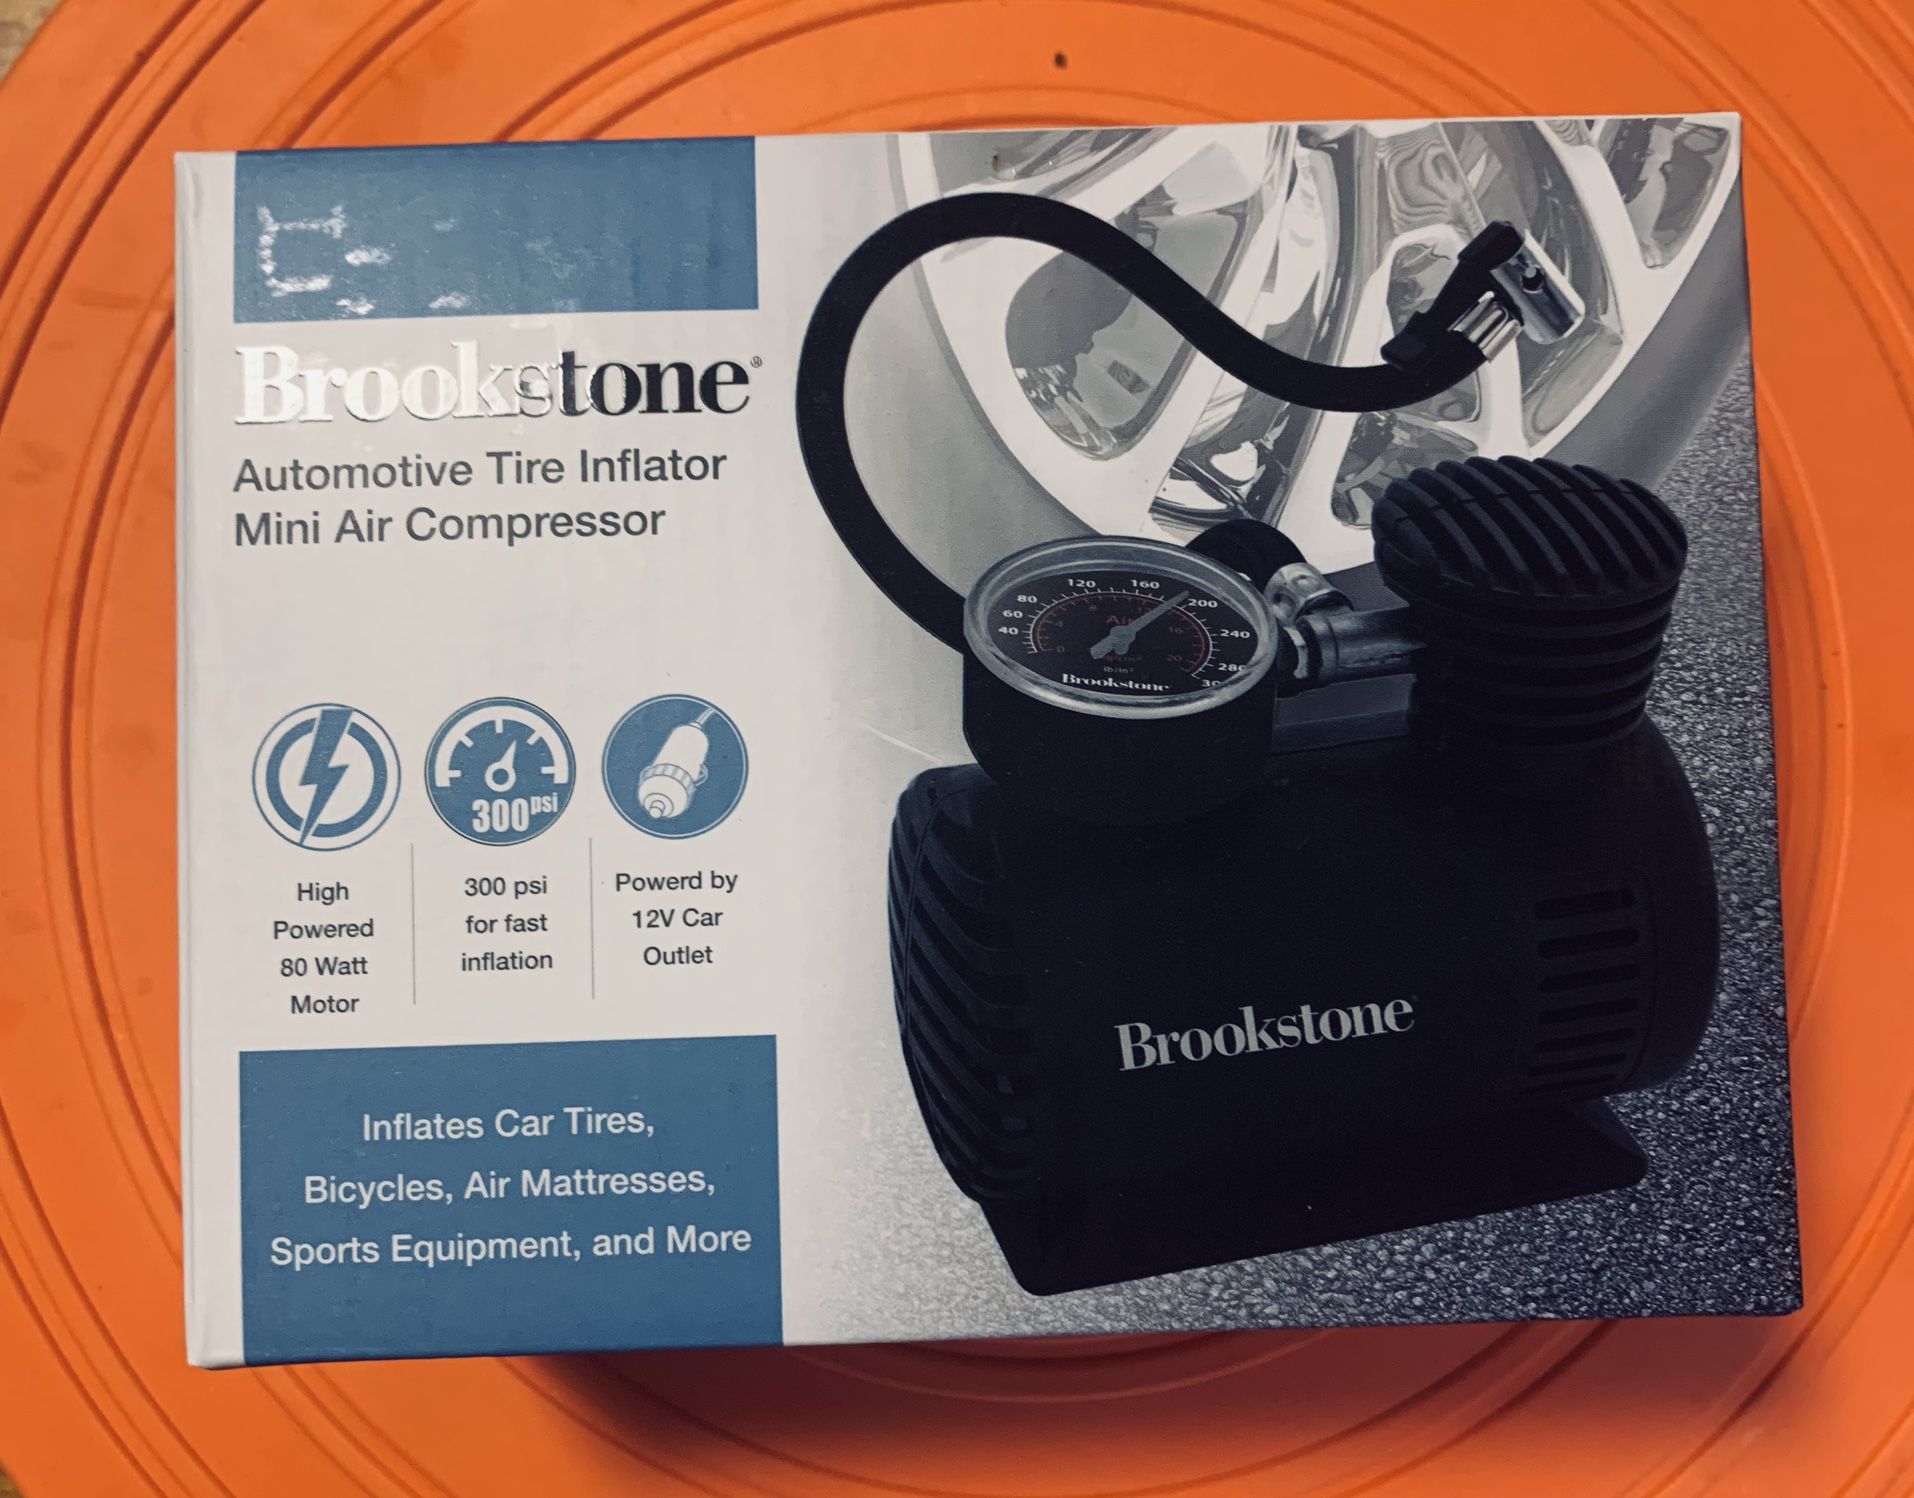 BROOKSTONE  AUTOMOTIVE TIRE INFLATOR MINI AIR COMPRESSOR  - NEW AND SEALED IN BOX 80 WATT HIGH POWERED 300 PSI POWERED BY 12 V car OUTLEET